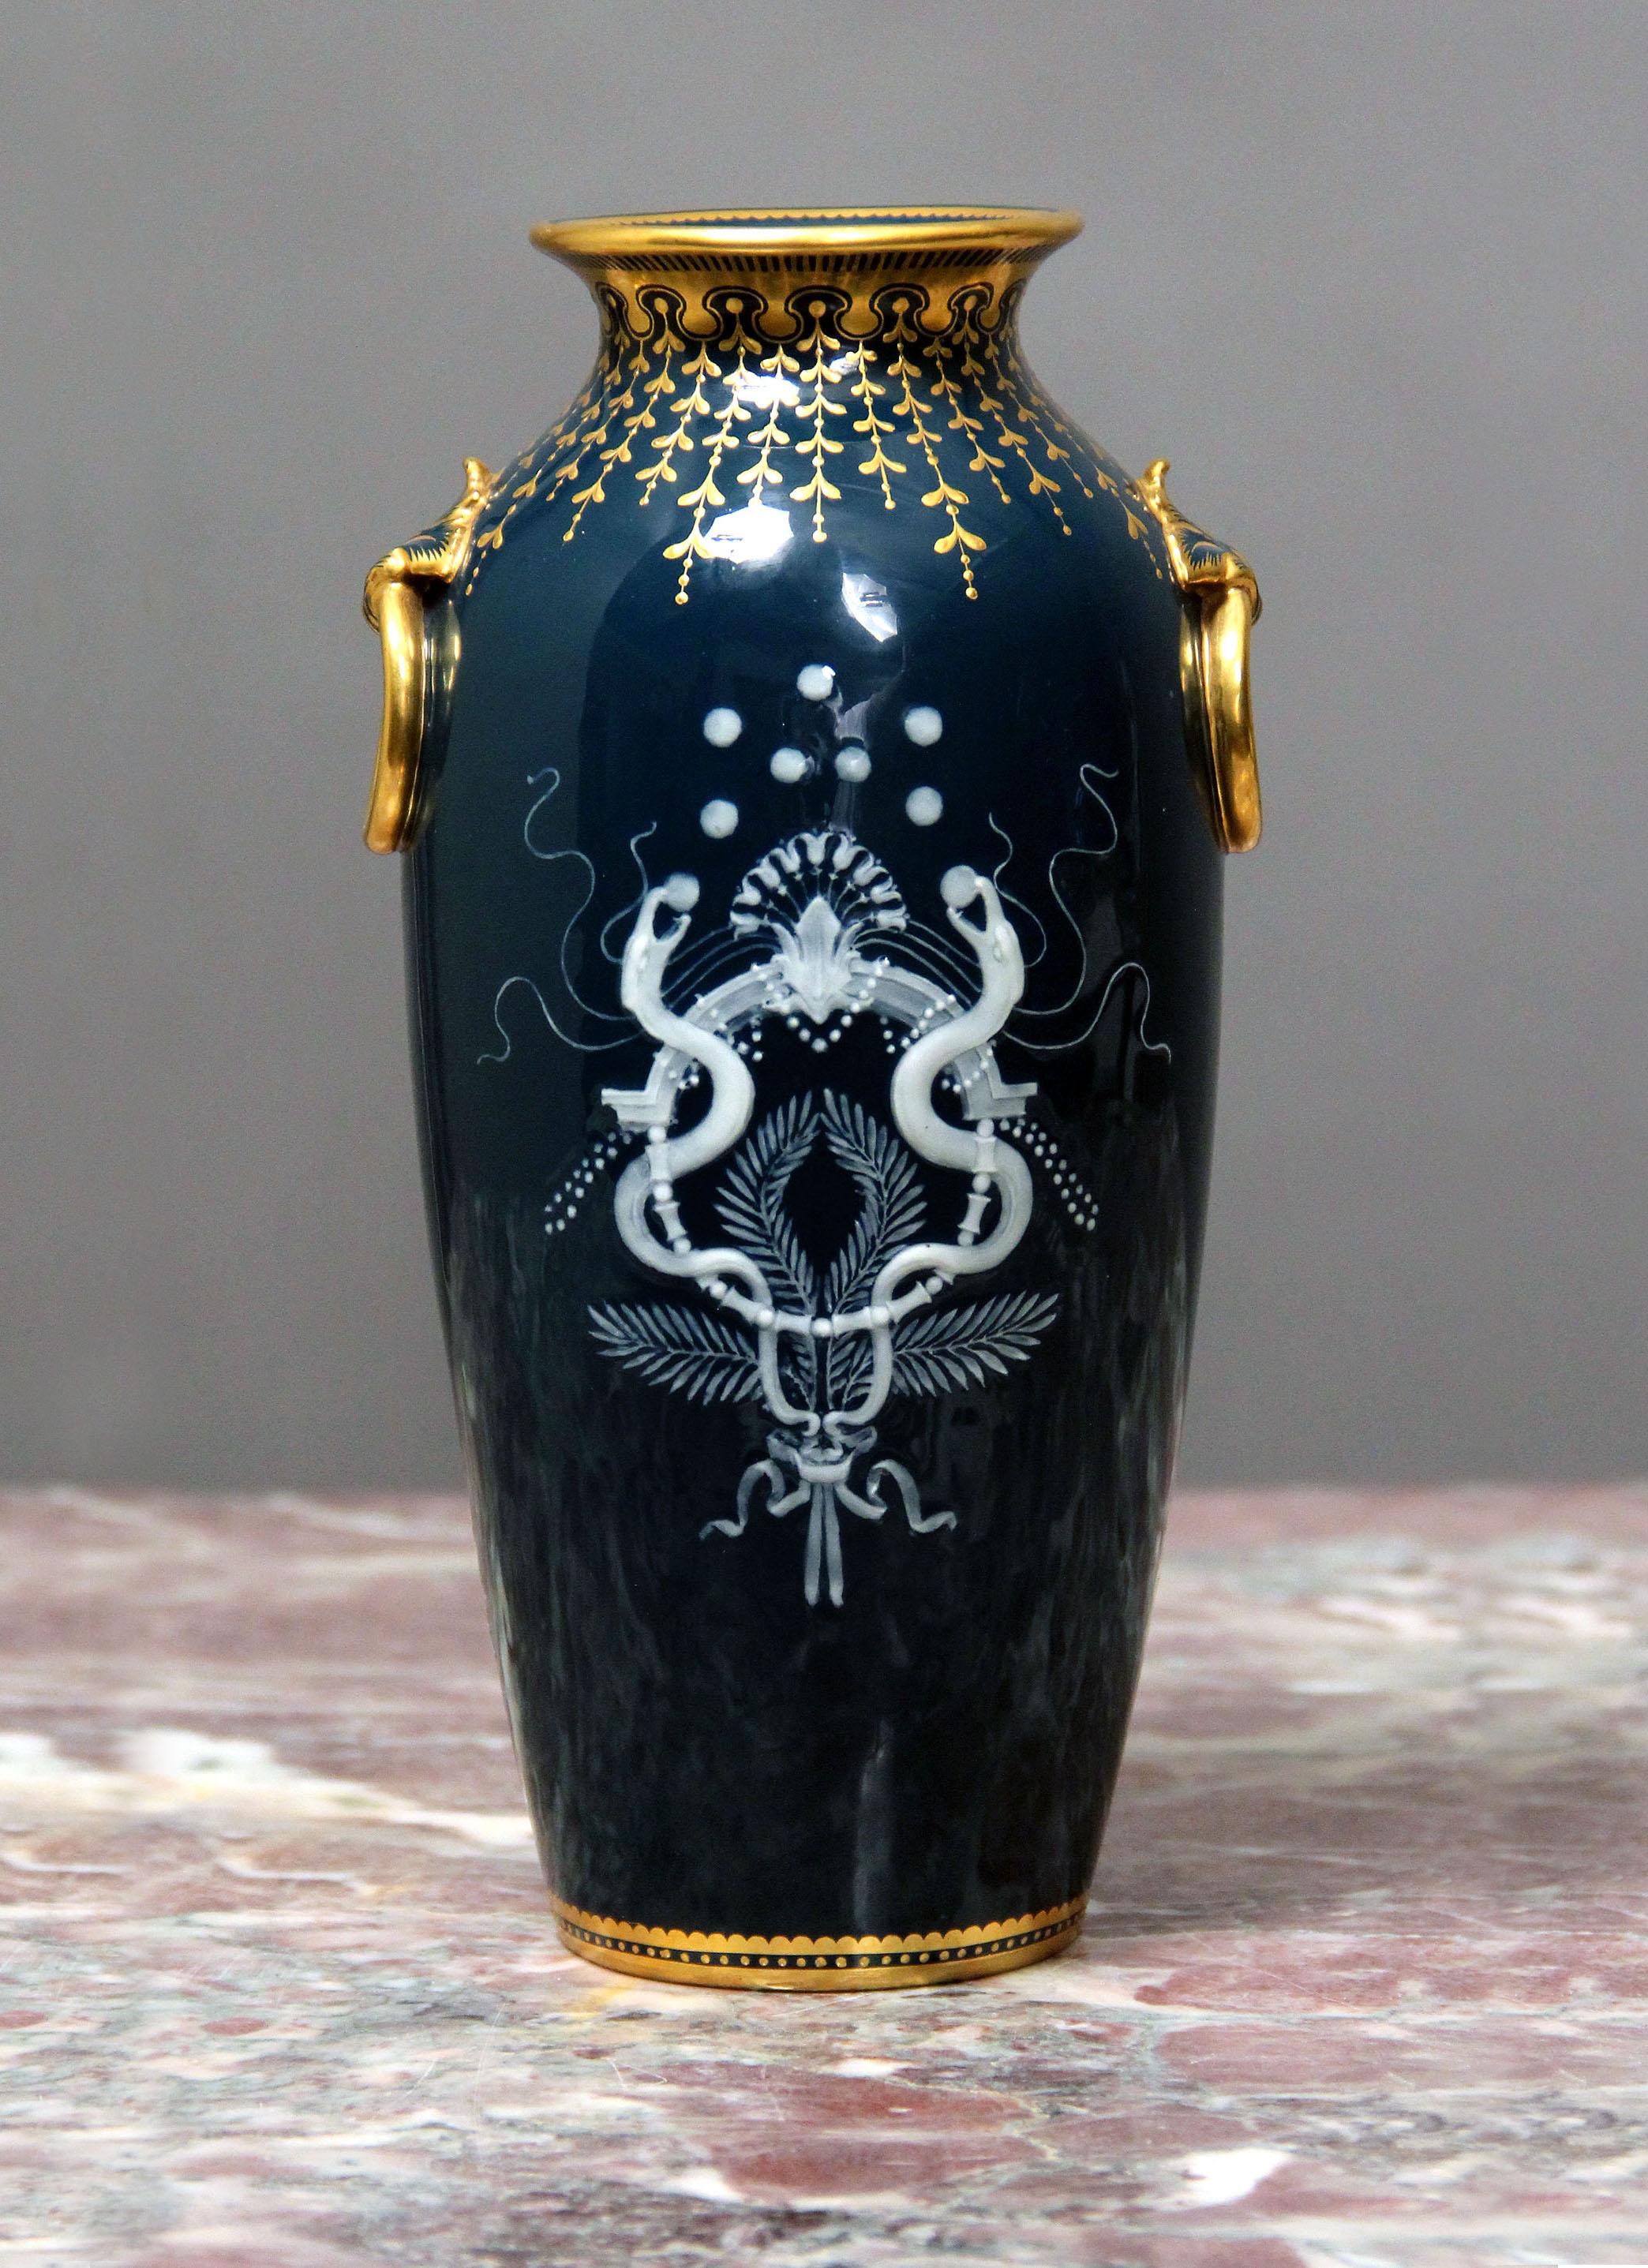 A wonderful late 19th century Minton Pâte-Sur-Pâte vase

Louis Solon

The front with an angel playing with hearts and the back with two serpents.

Signed L. Solon to the front and stamped Minton on the bottom.

Louis Marc Emmanuel Solon